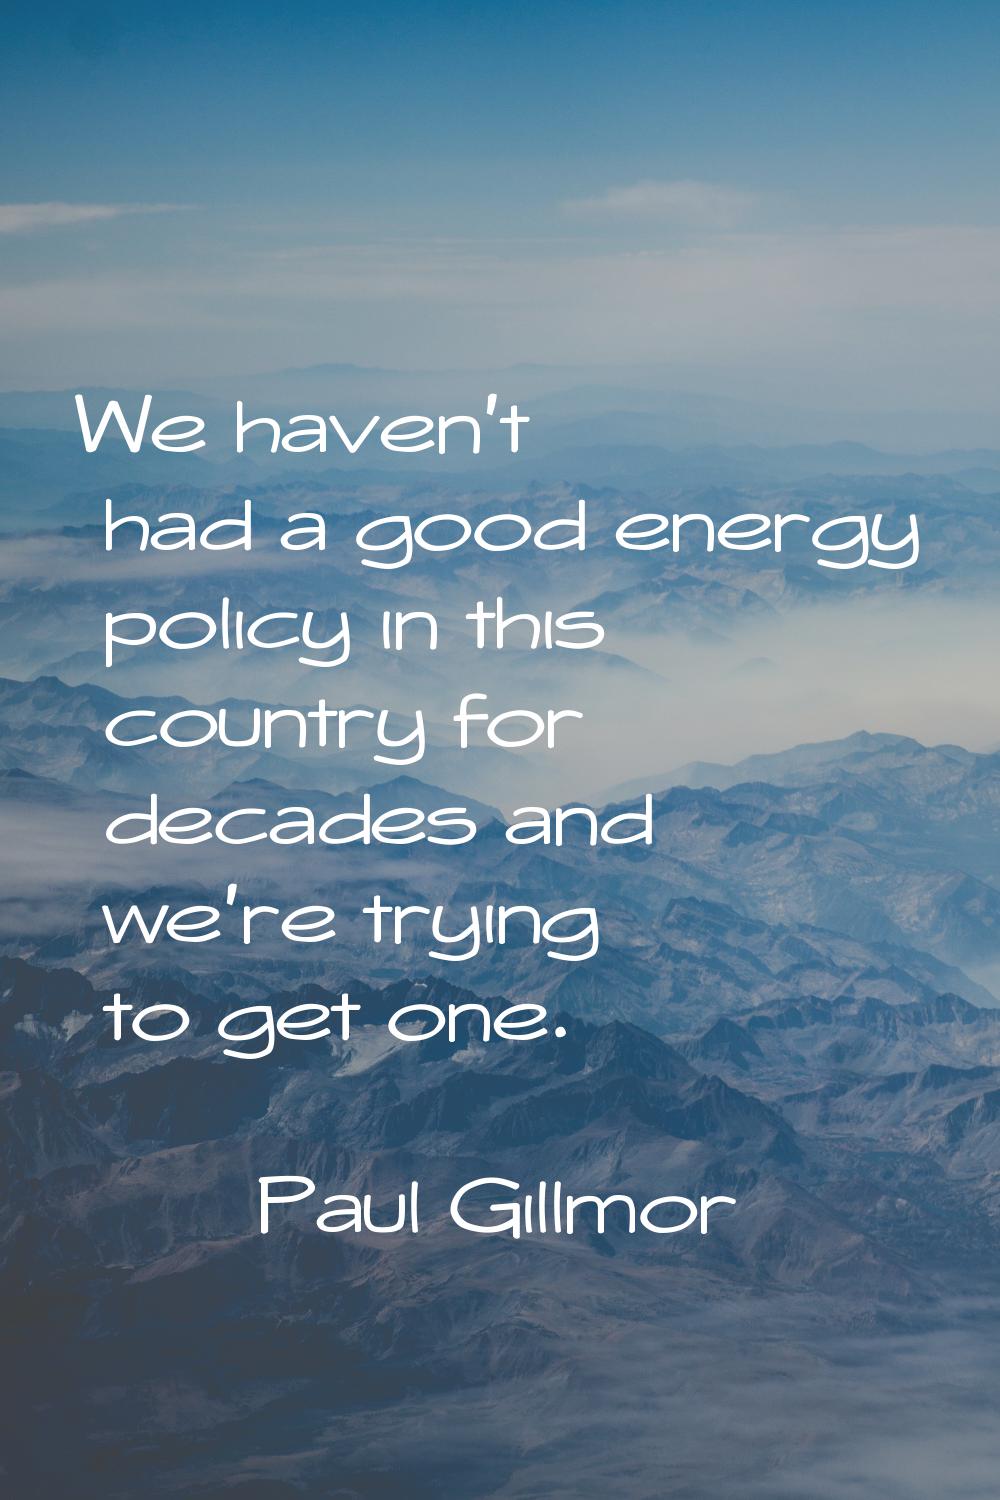 We haven't had a good energy policy in this country for decades and we're trying to get one.